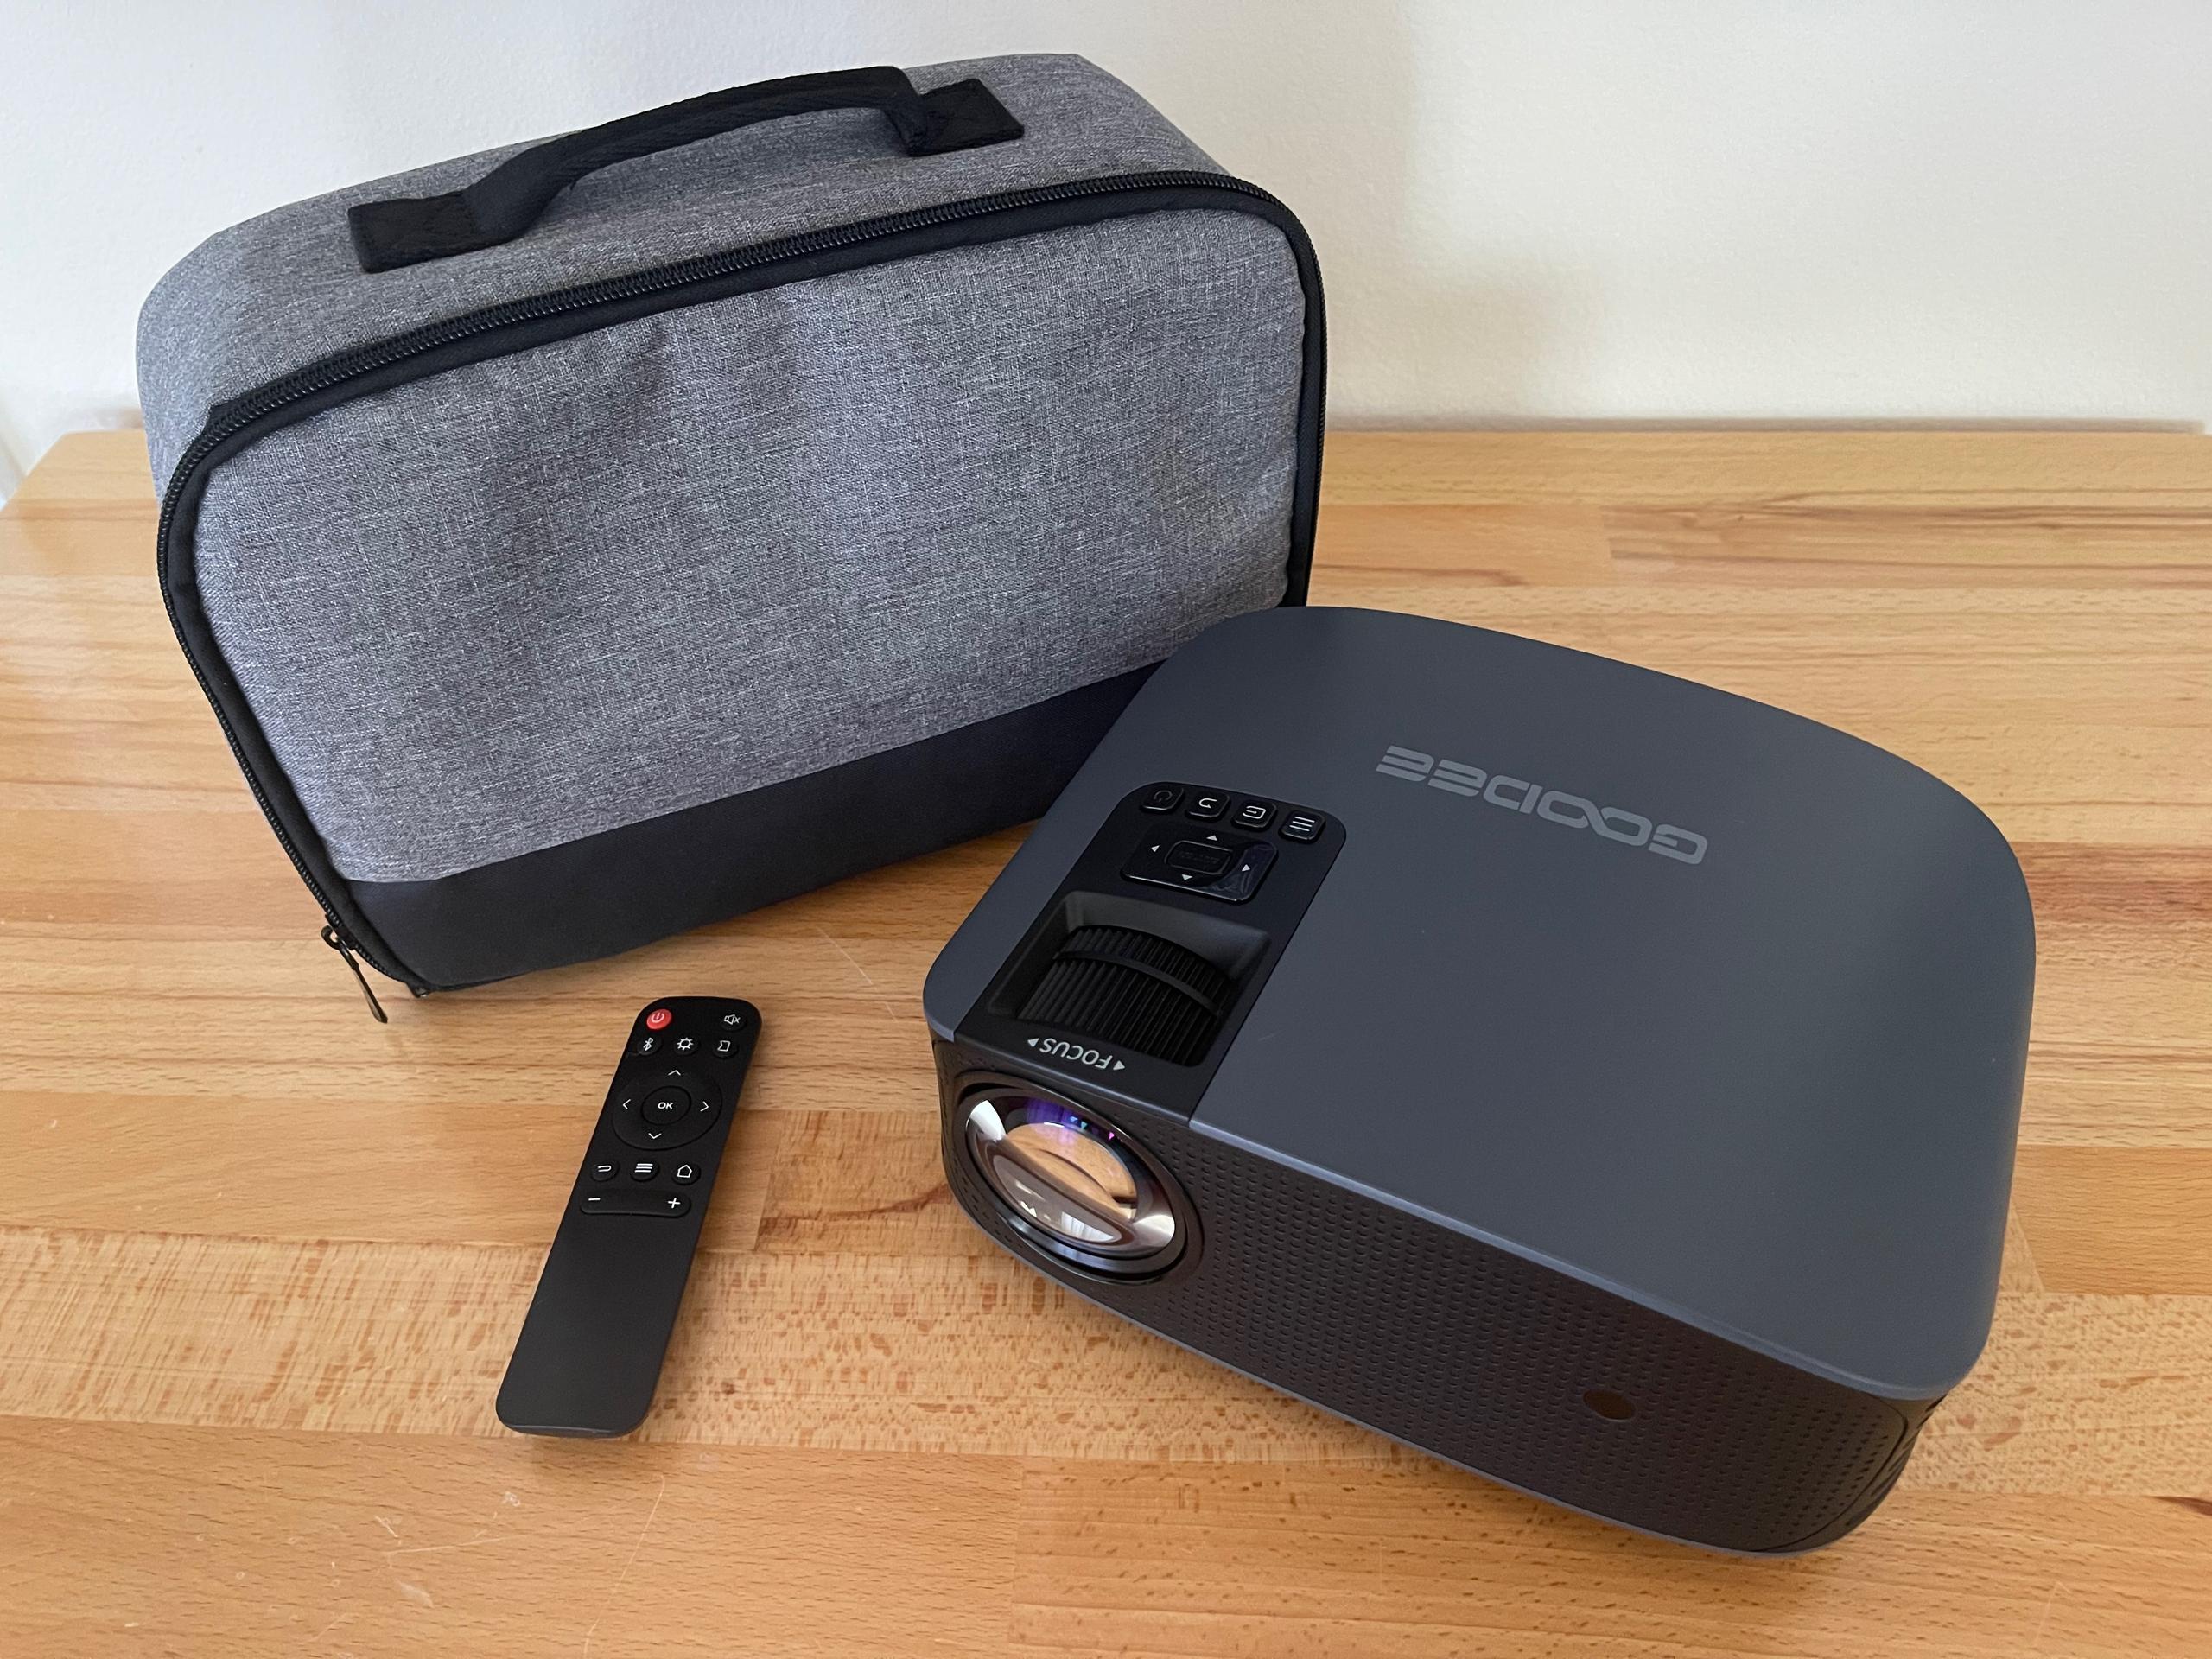 GooDee Y600 Plus Video Projector, a bag and a remote control on a desk